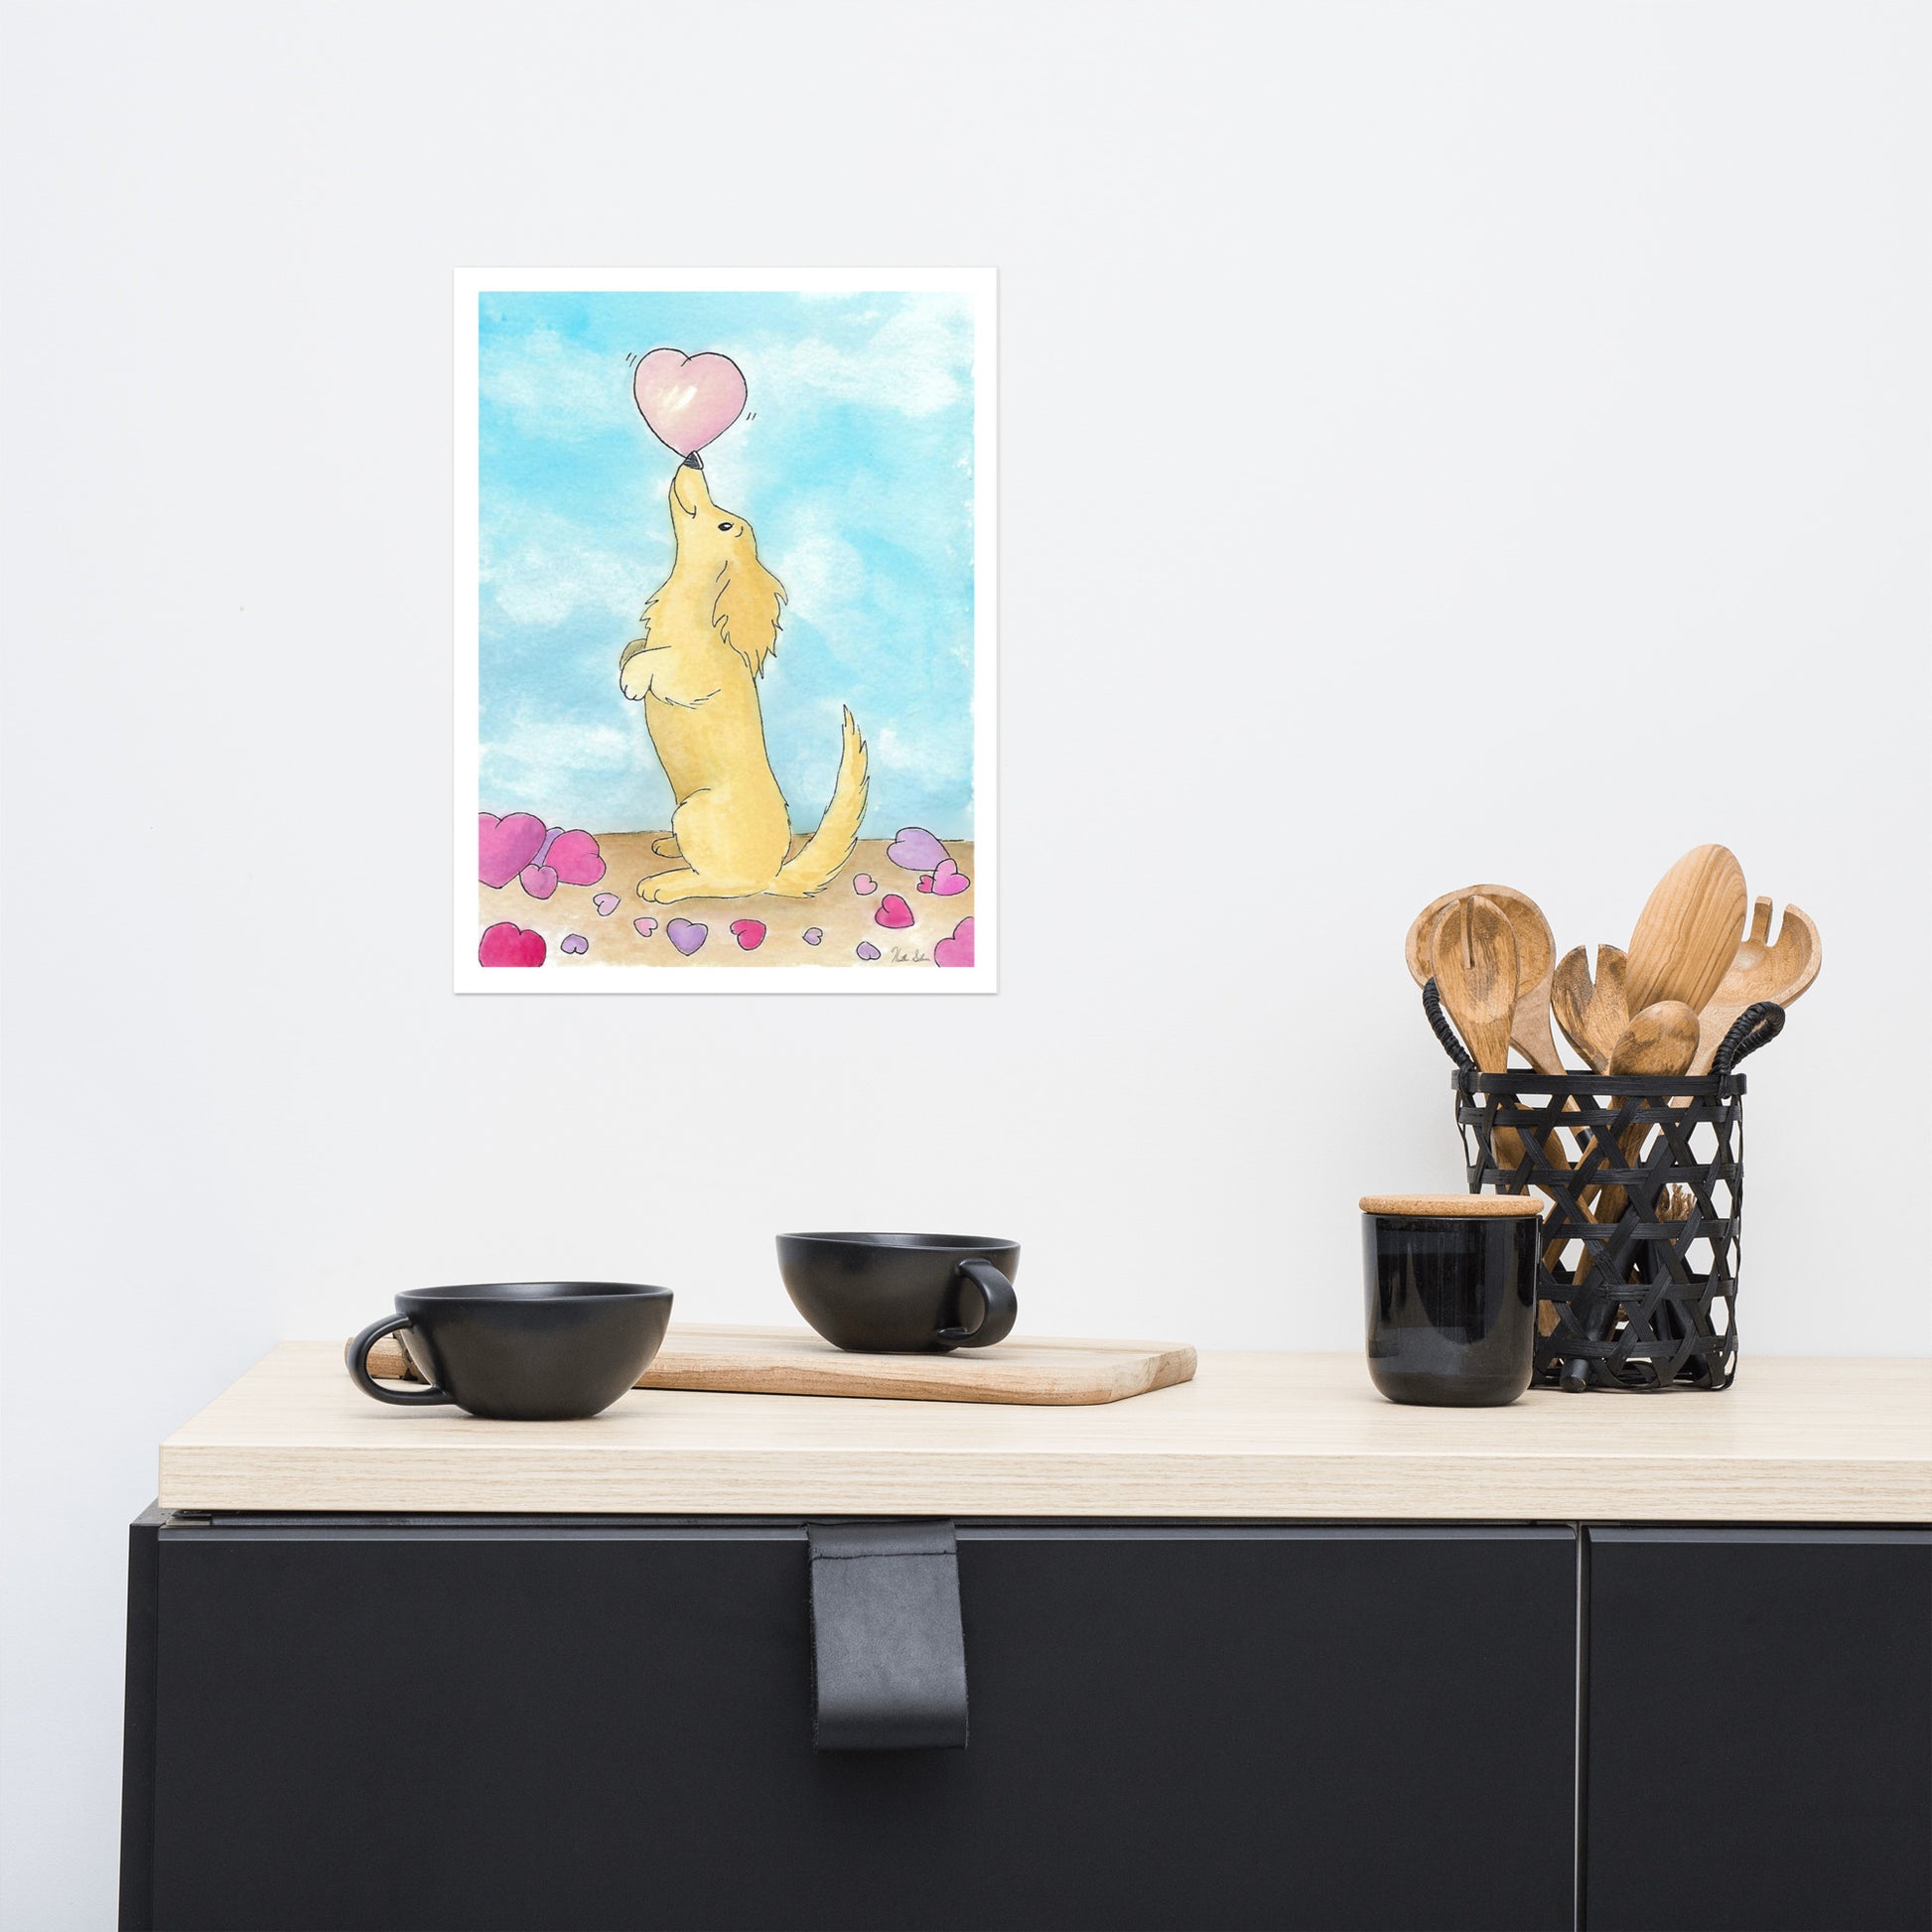 12 x 16 inch enhanced matte paper art print. Watercolor painting entitled Puppy love. Design shows a cute puppy balancing a heart on its nose, with hearts on the floor and a blue sky background. Shown on wall above kitchen counter with bowls and utensils.